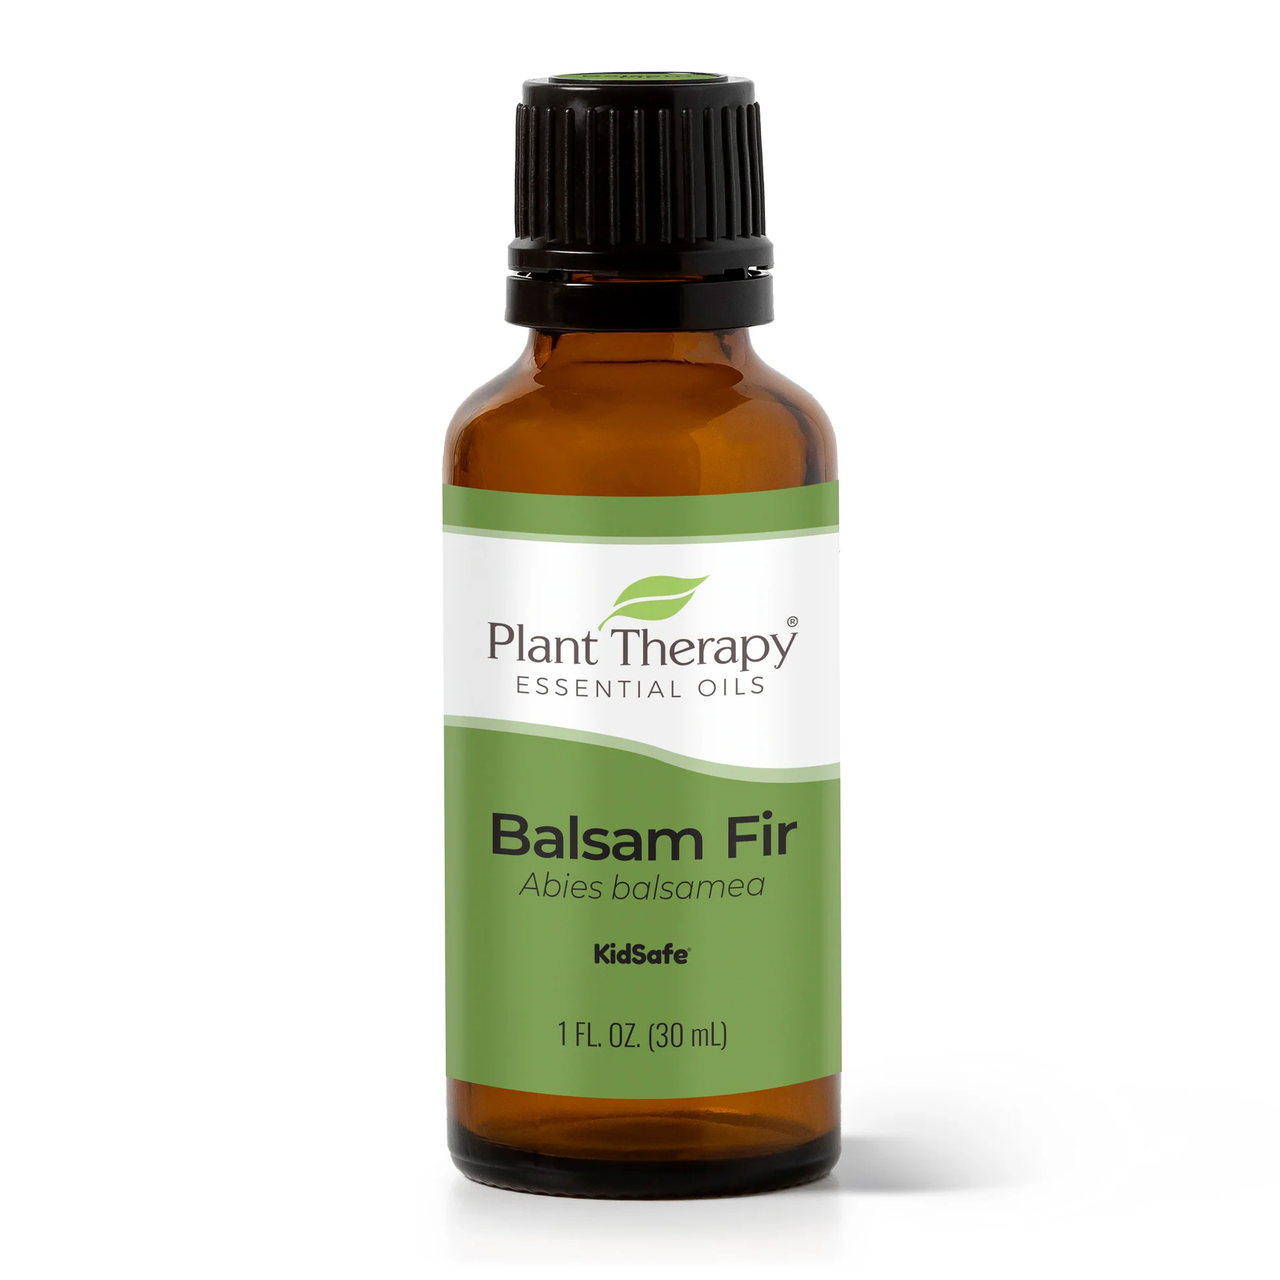 Balsam Fir Essential Oil - Plant Therapy